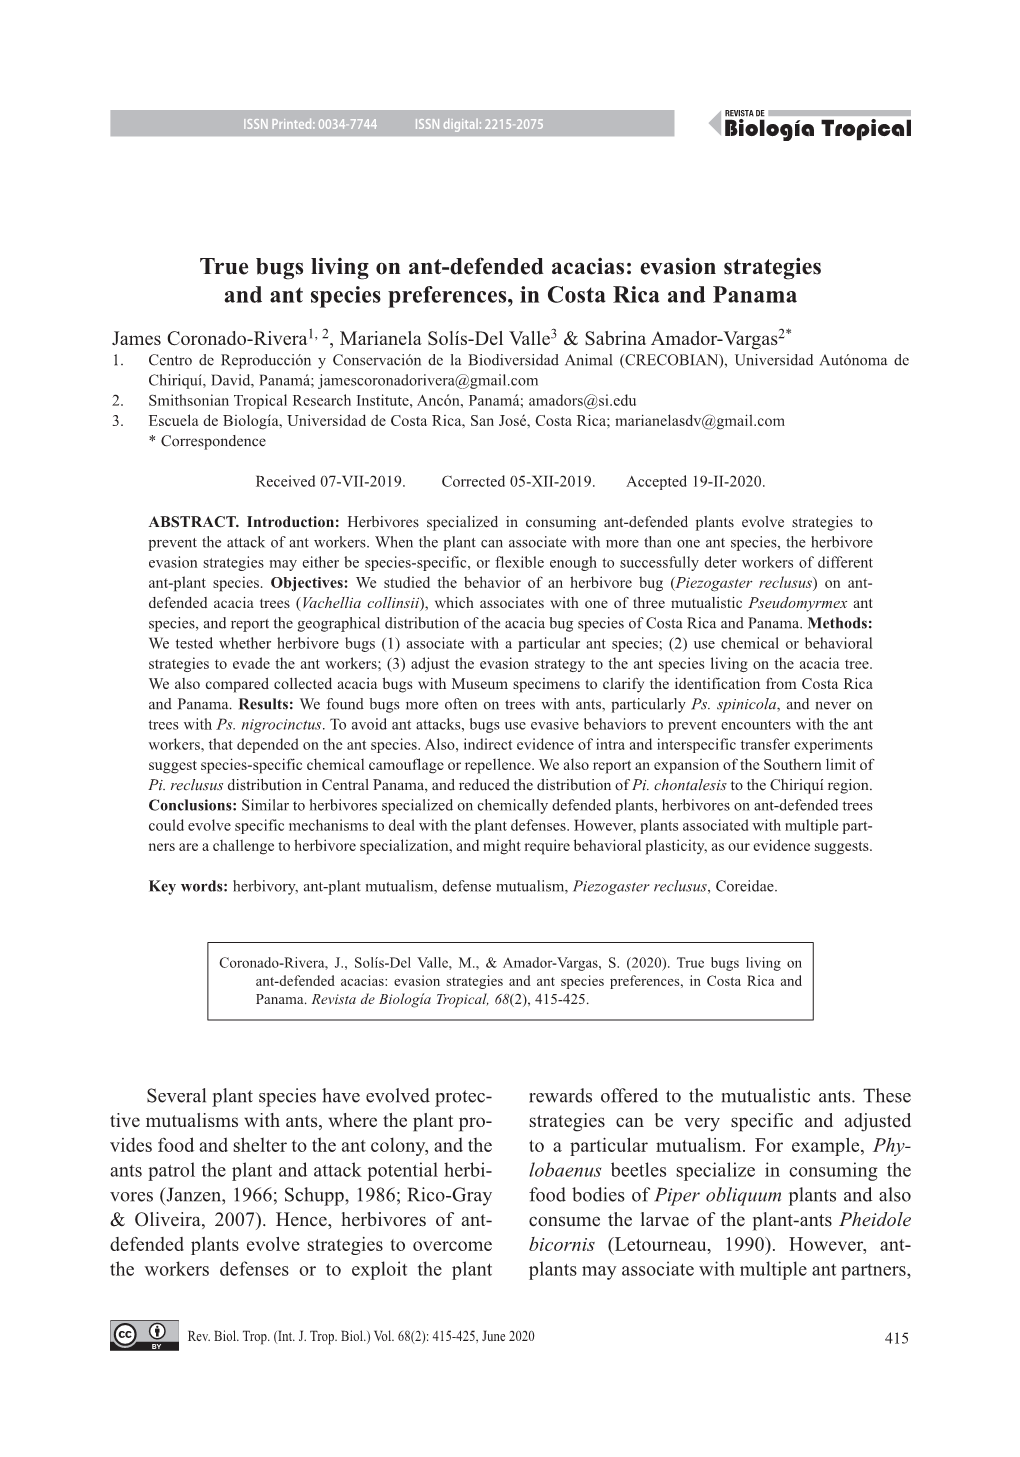 True Bugs Living on Ant-Defended Acacias: Evasion Strategies and Ant Species Preferences, in Costa Rica and Panama